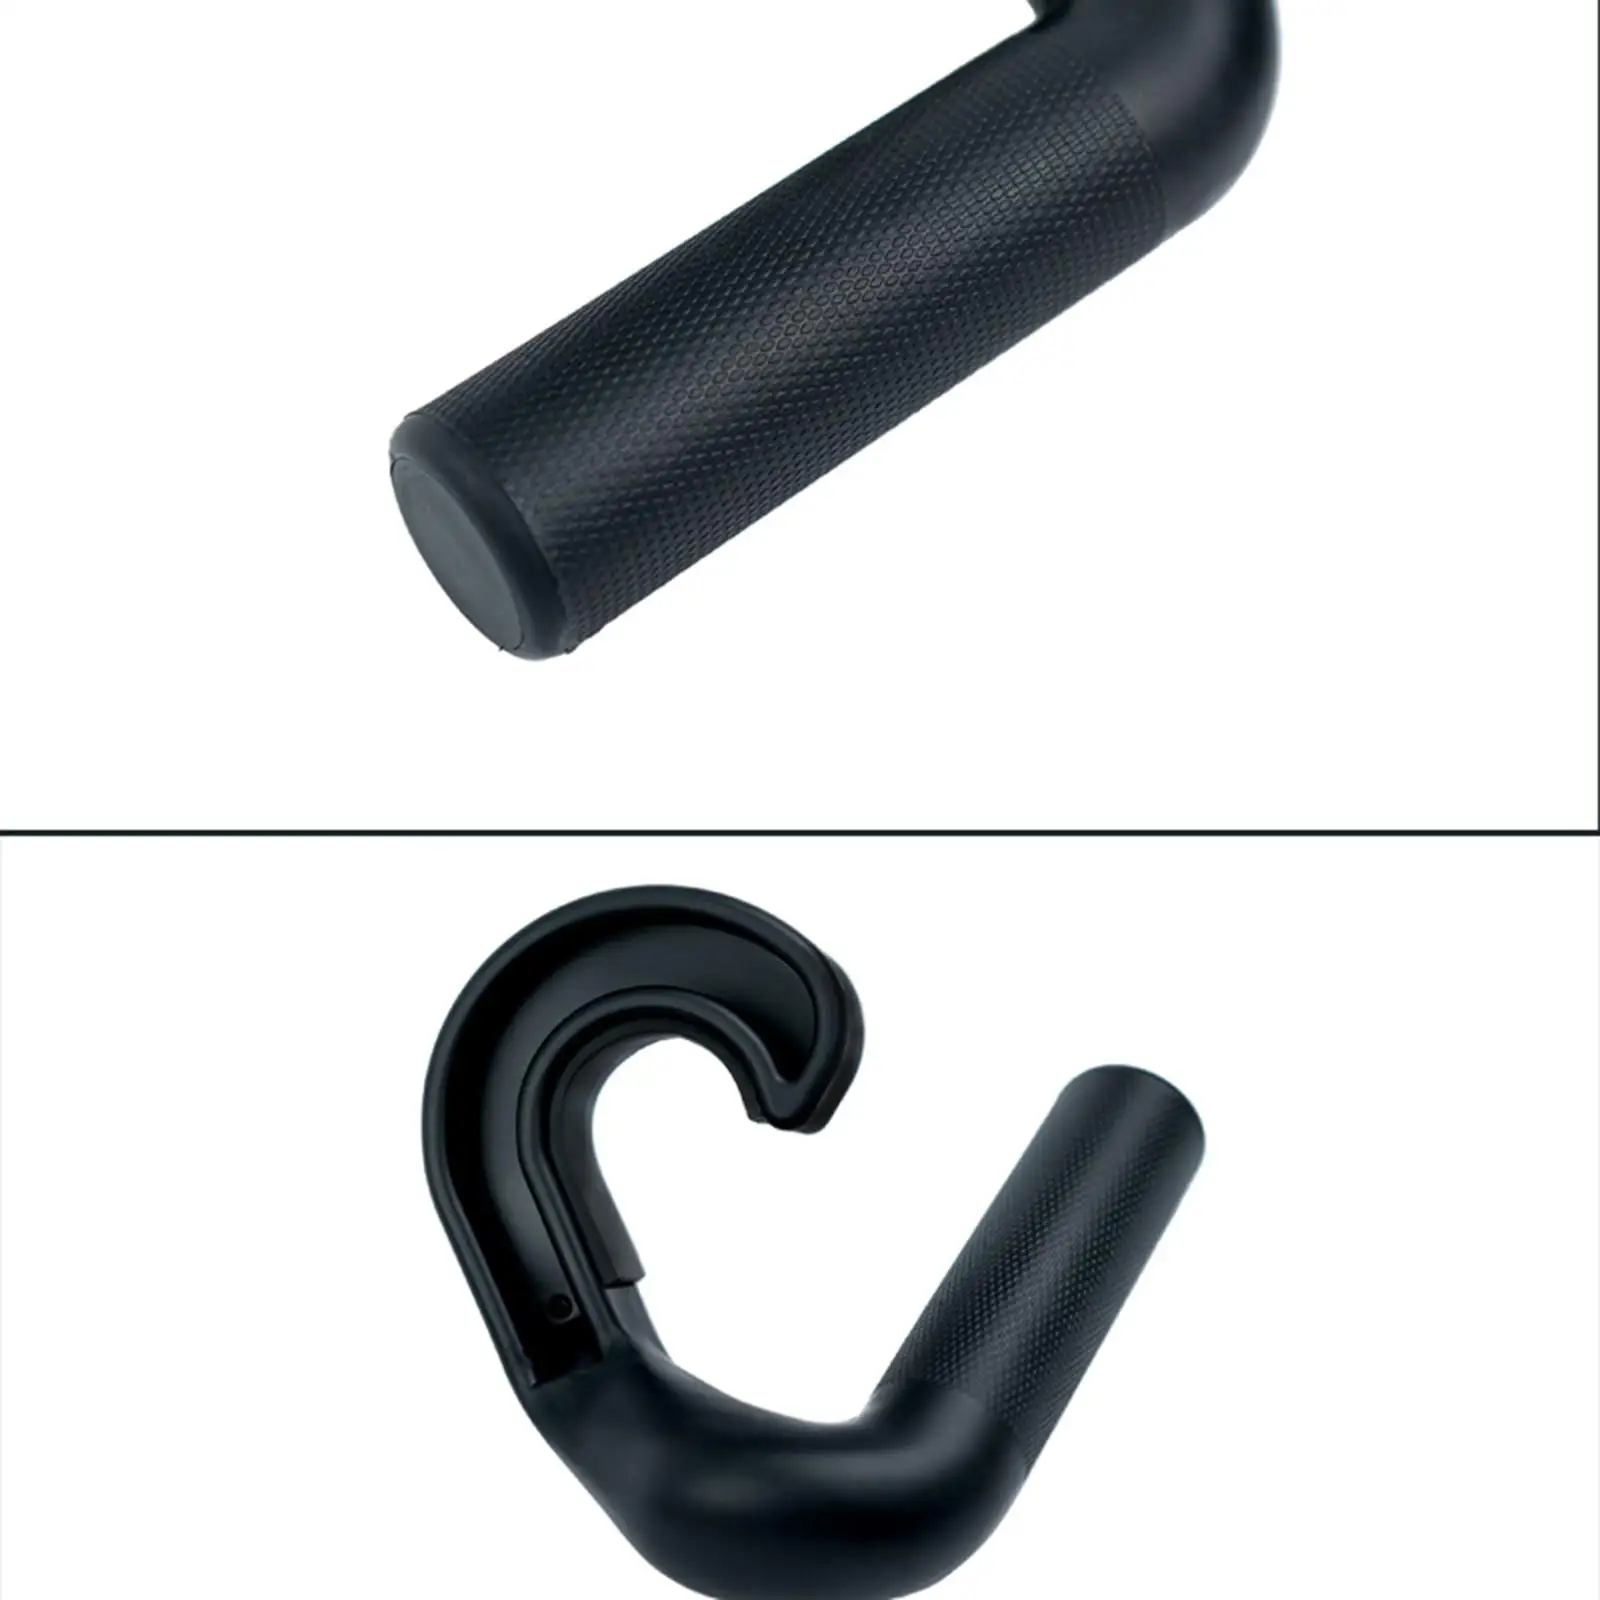 2x Pull Down Machine Attachment Hand Grips for Pull up Bars Fitness Barbells